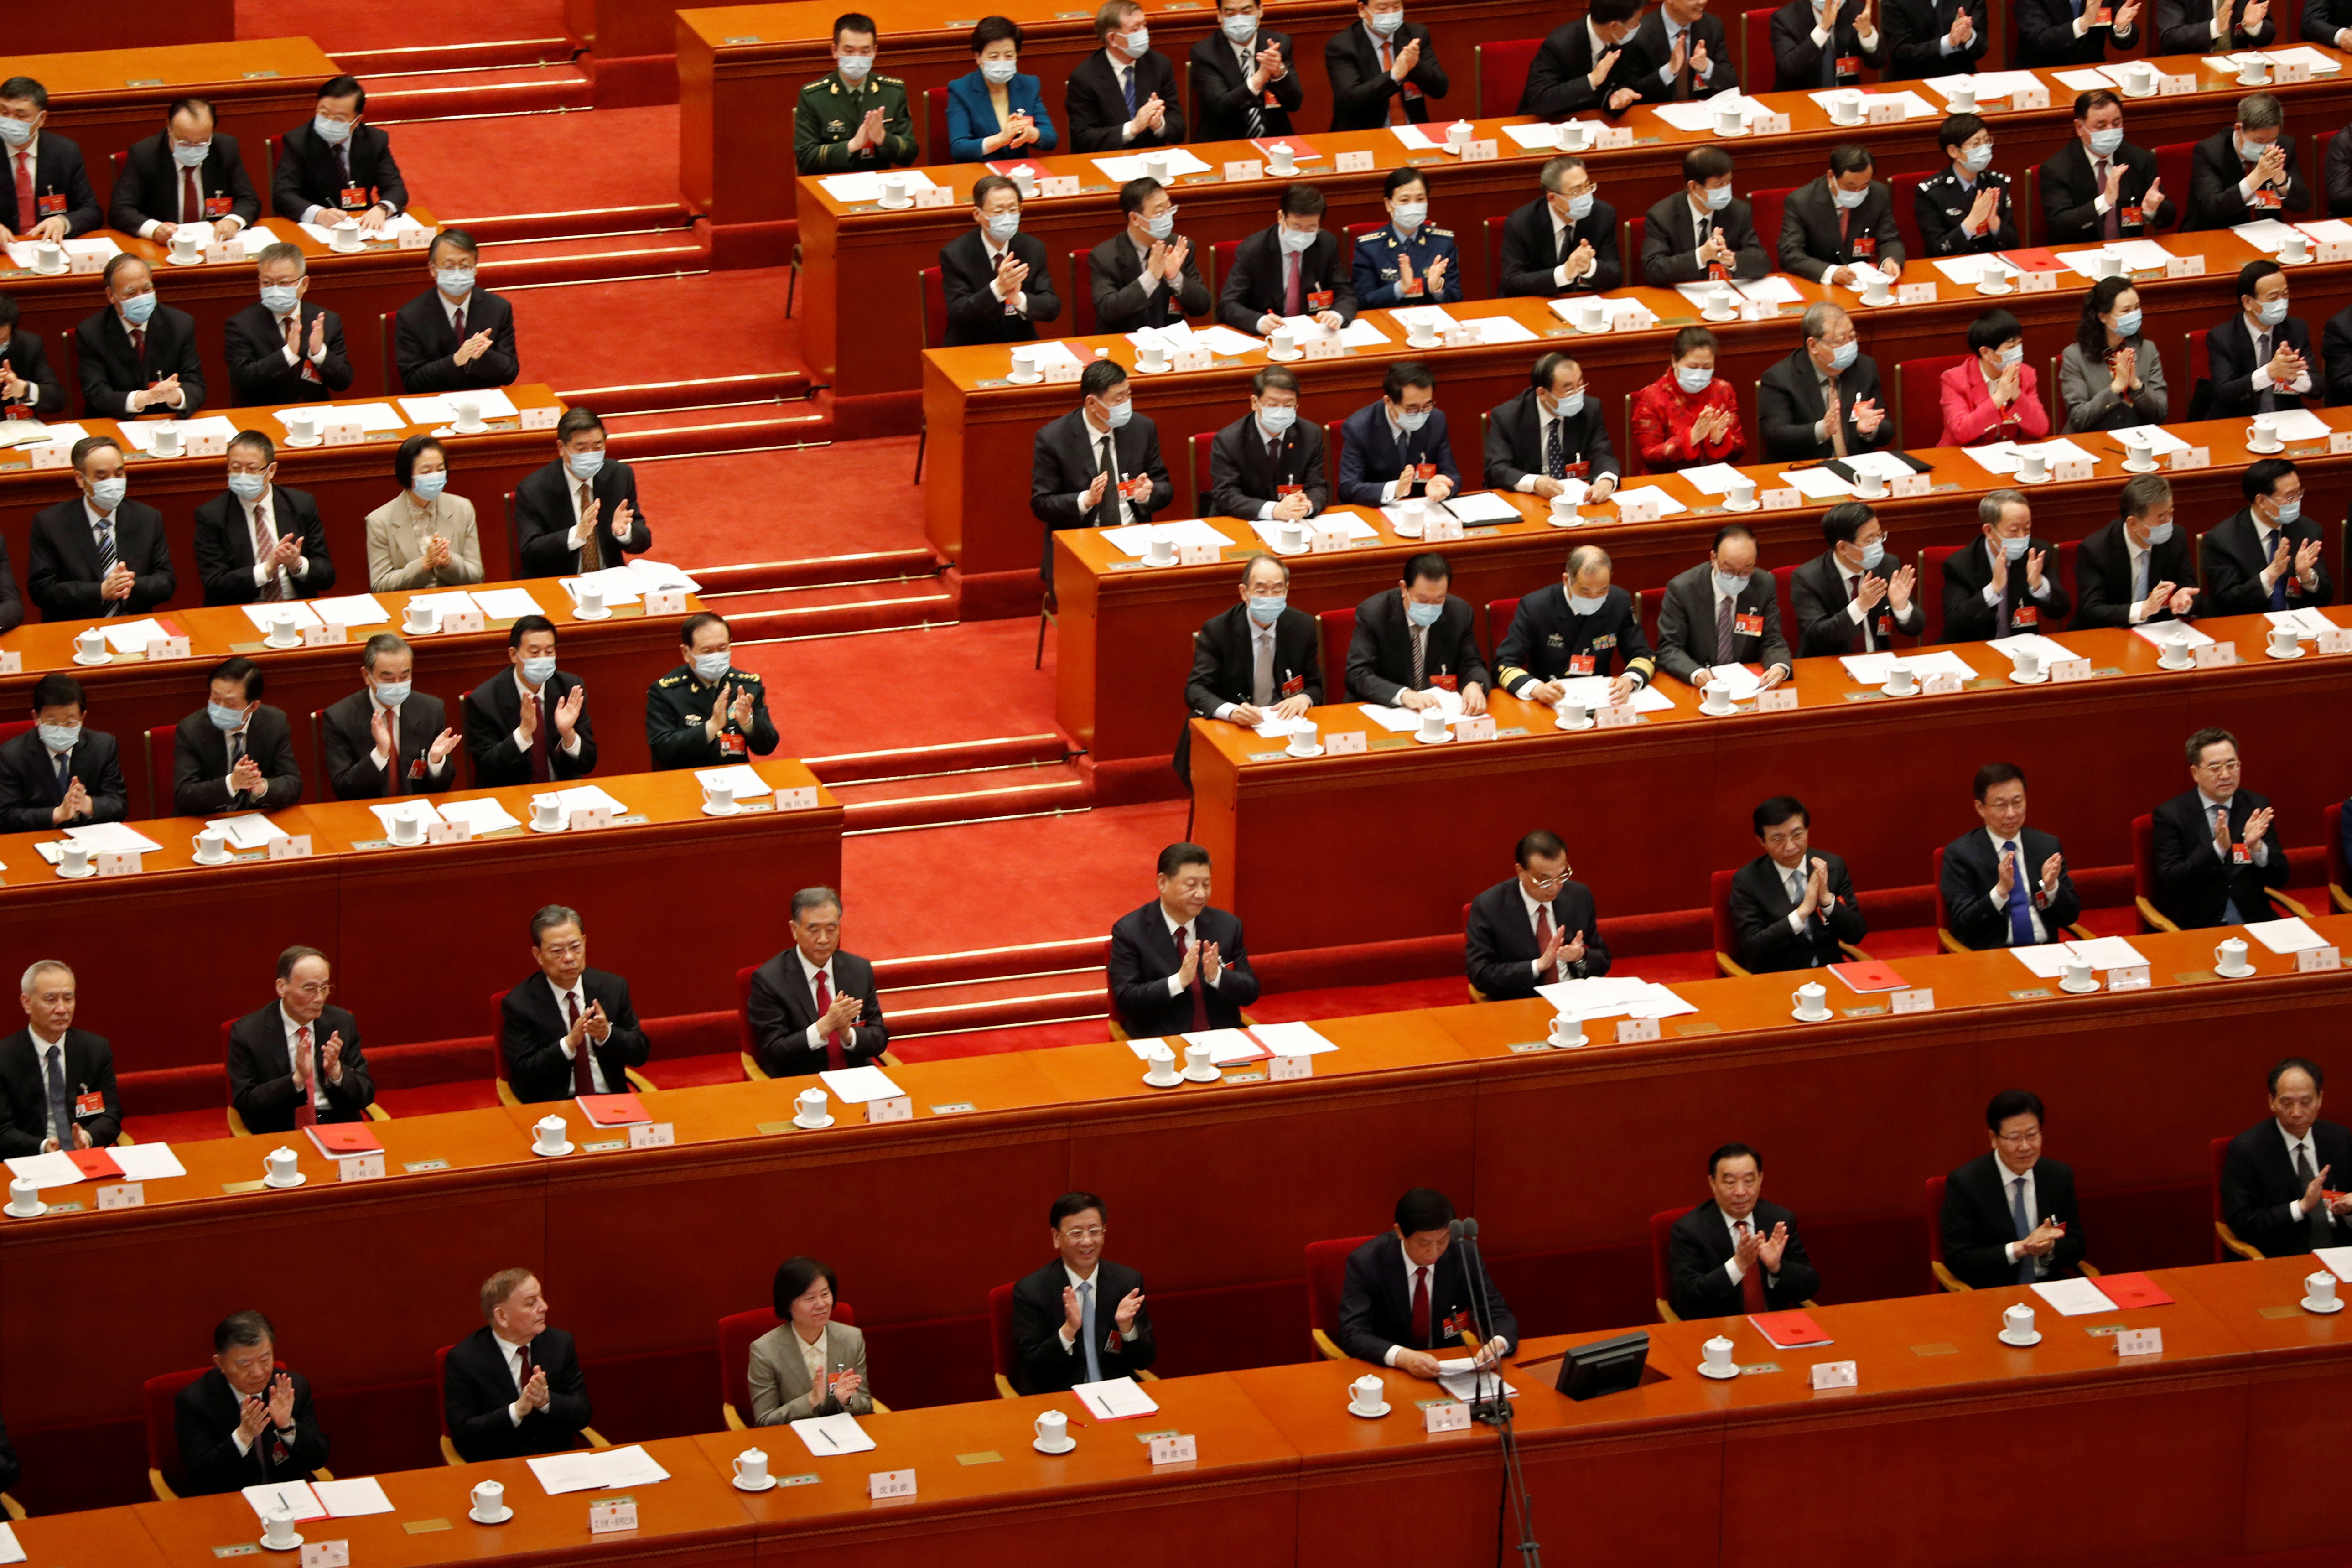 Closing session of the National People's Congress (NPC) in Beijing